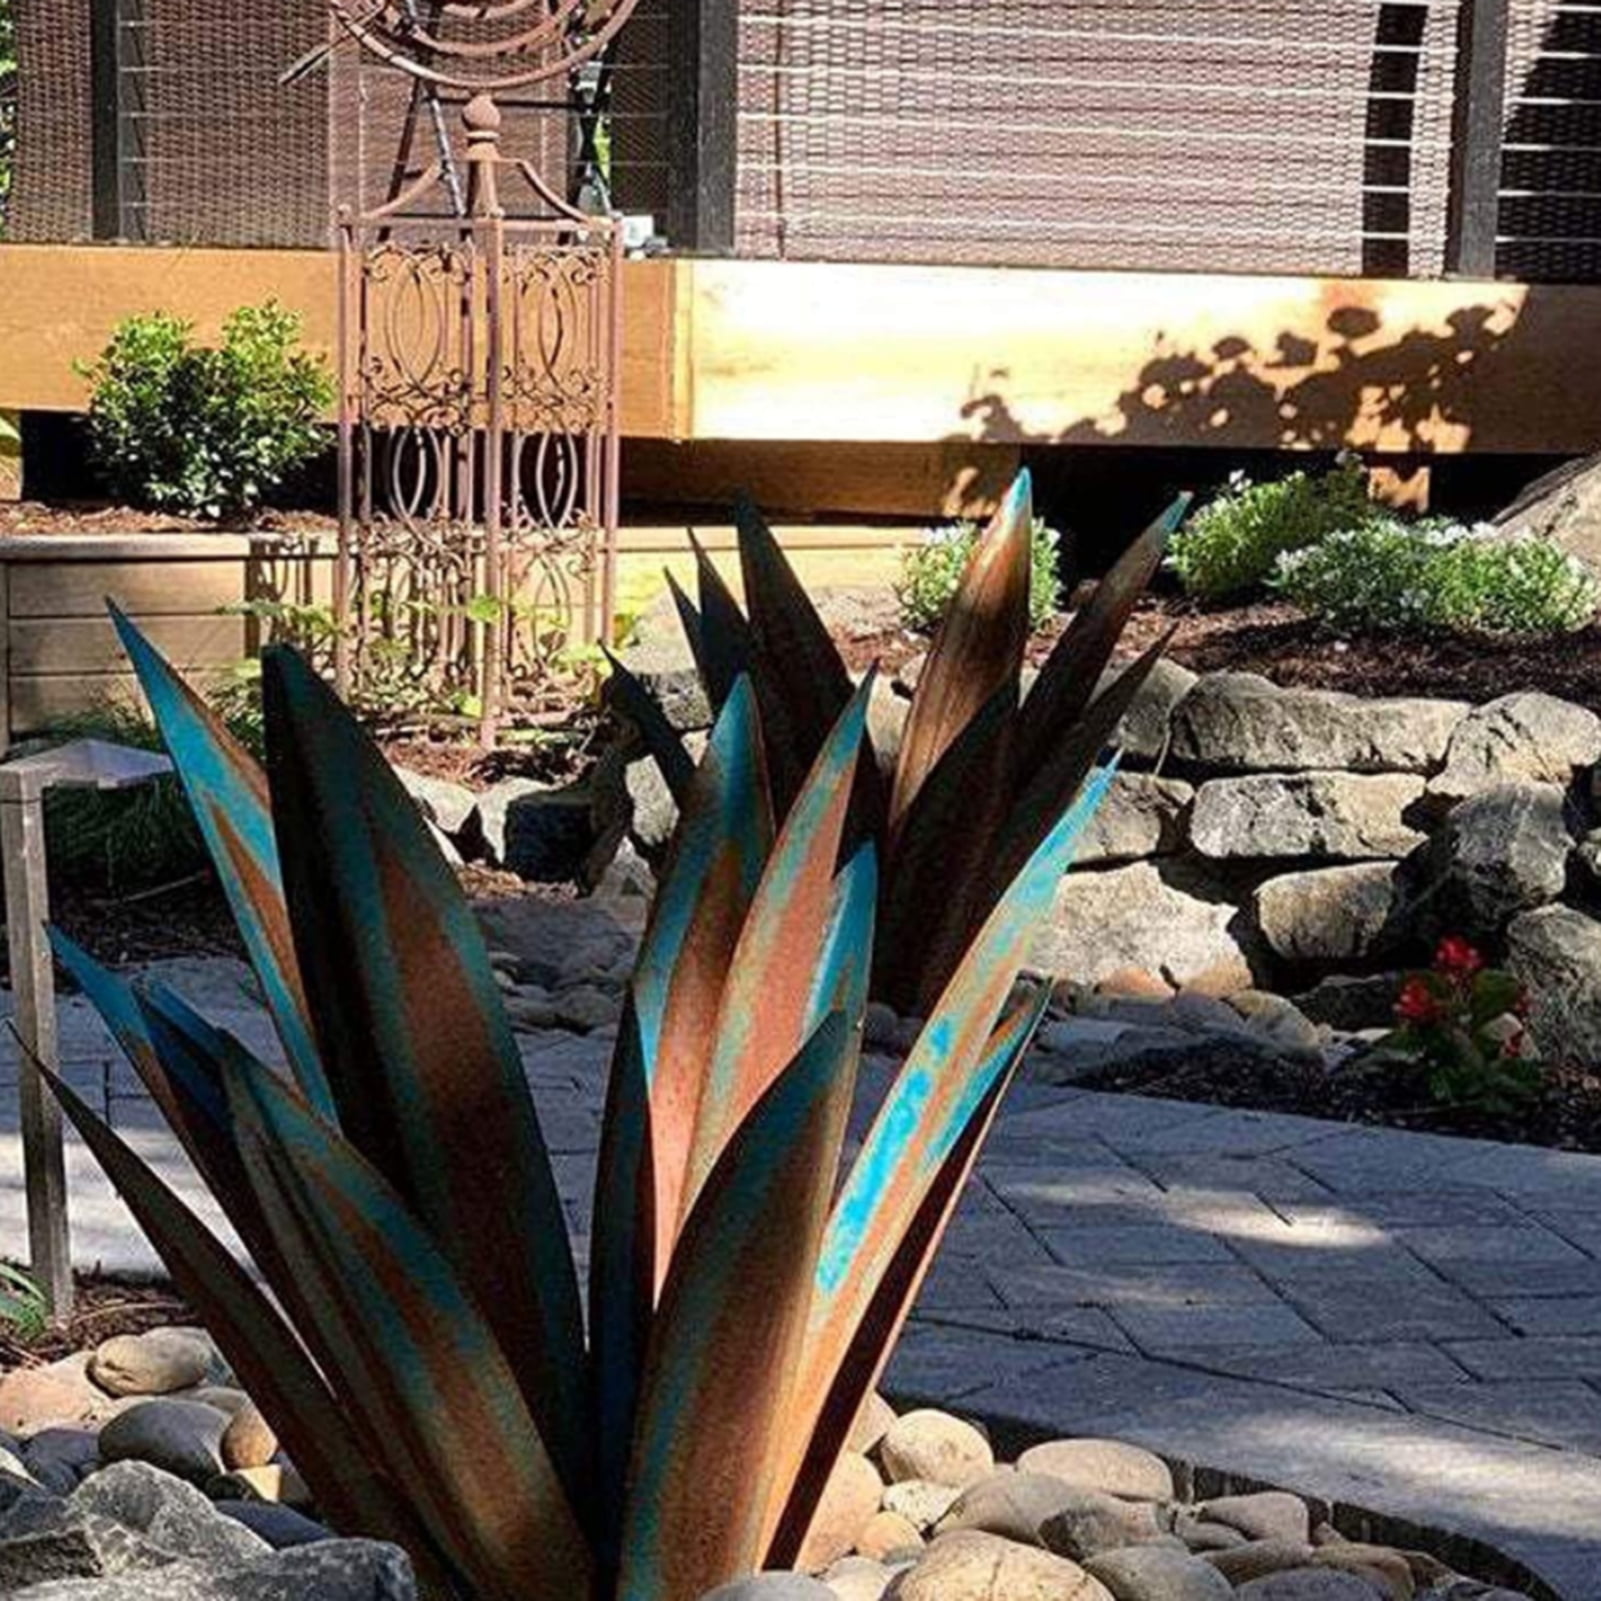 25.59in Tequila Rustic Sculpture,Rustic Hand Painted Metal Agave,DIY Easter Decor Metal Agave Plant Garden Yard Art Sculpture Lawn Home Ornaments,for Yard Stakes,Garden Figurines,Outdoor Patio